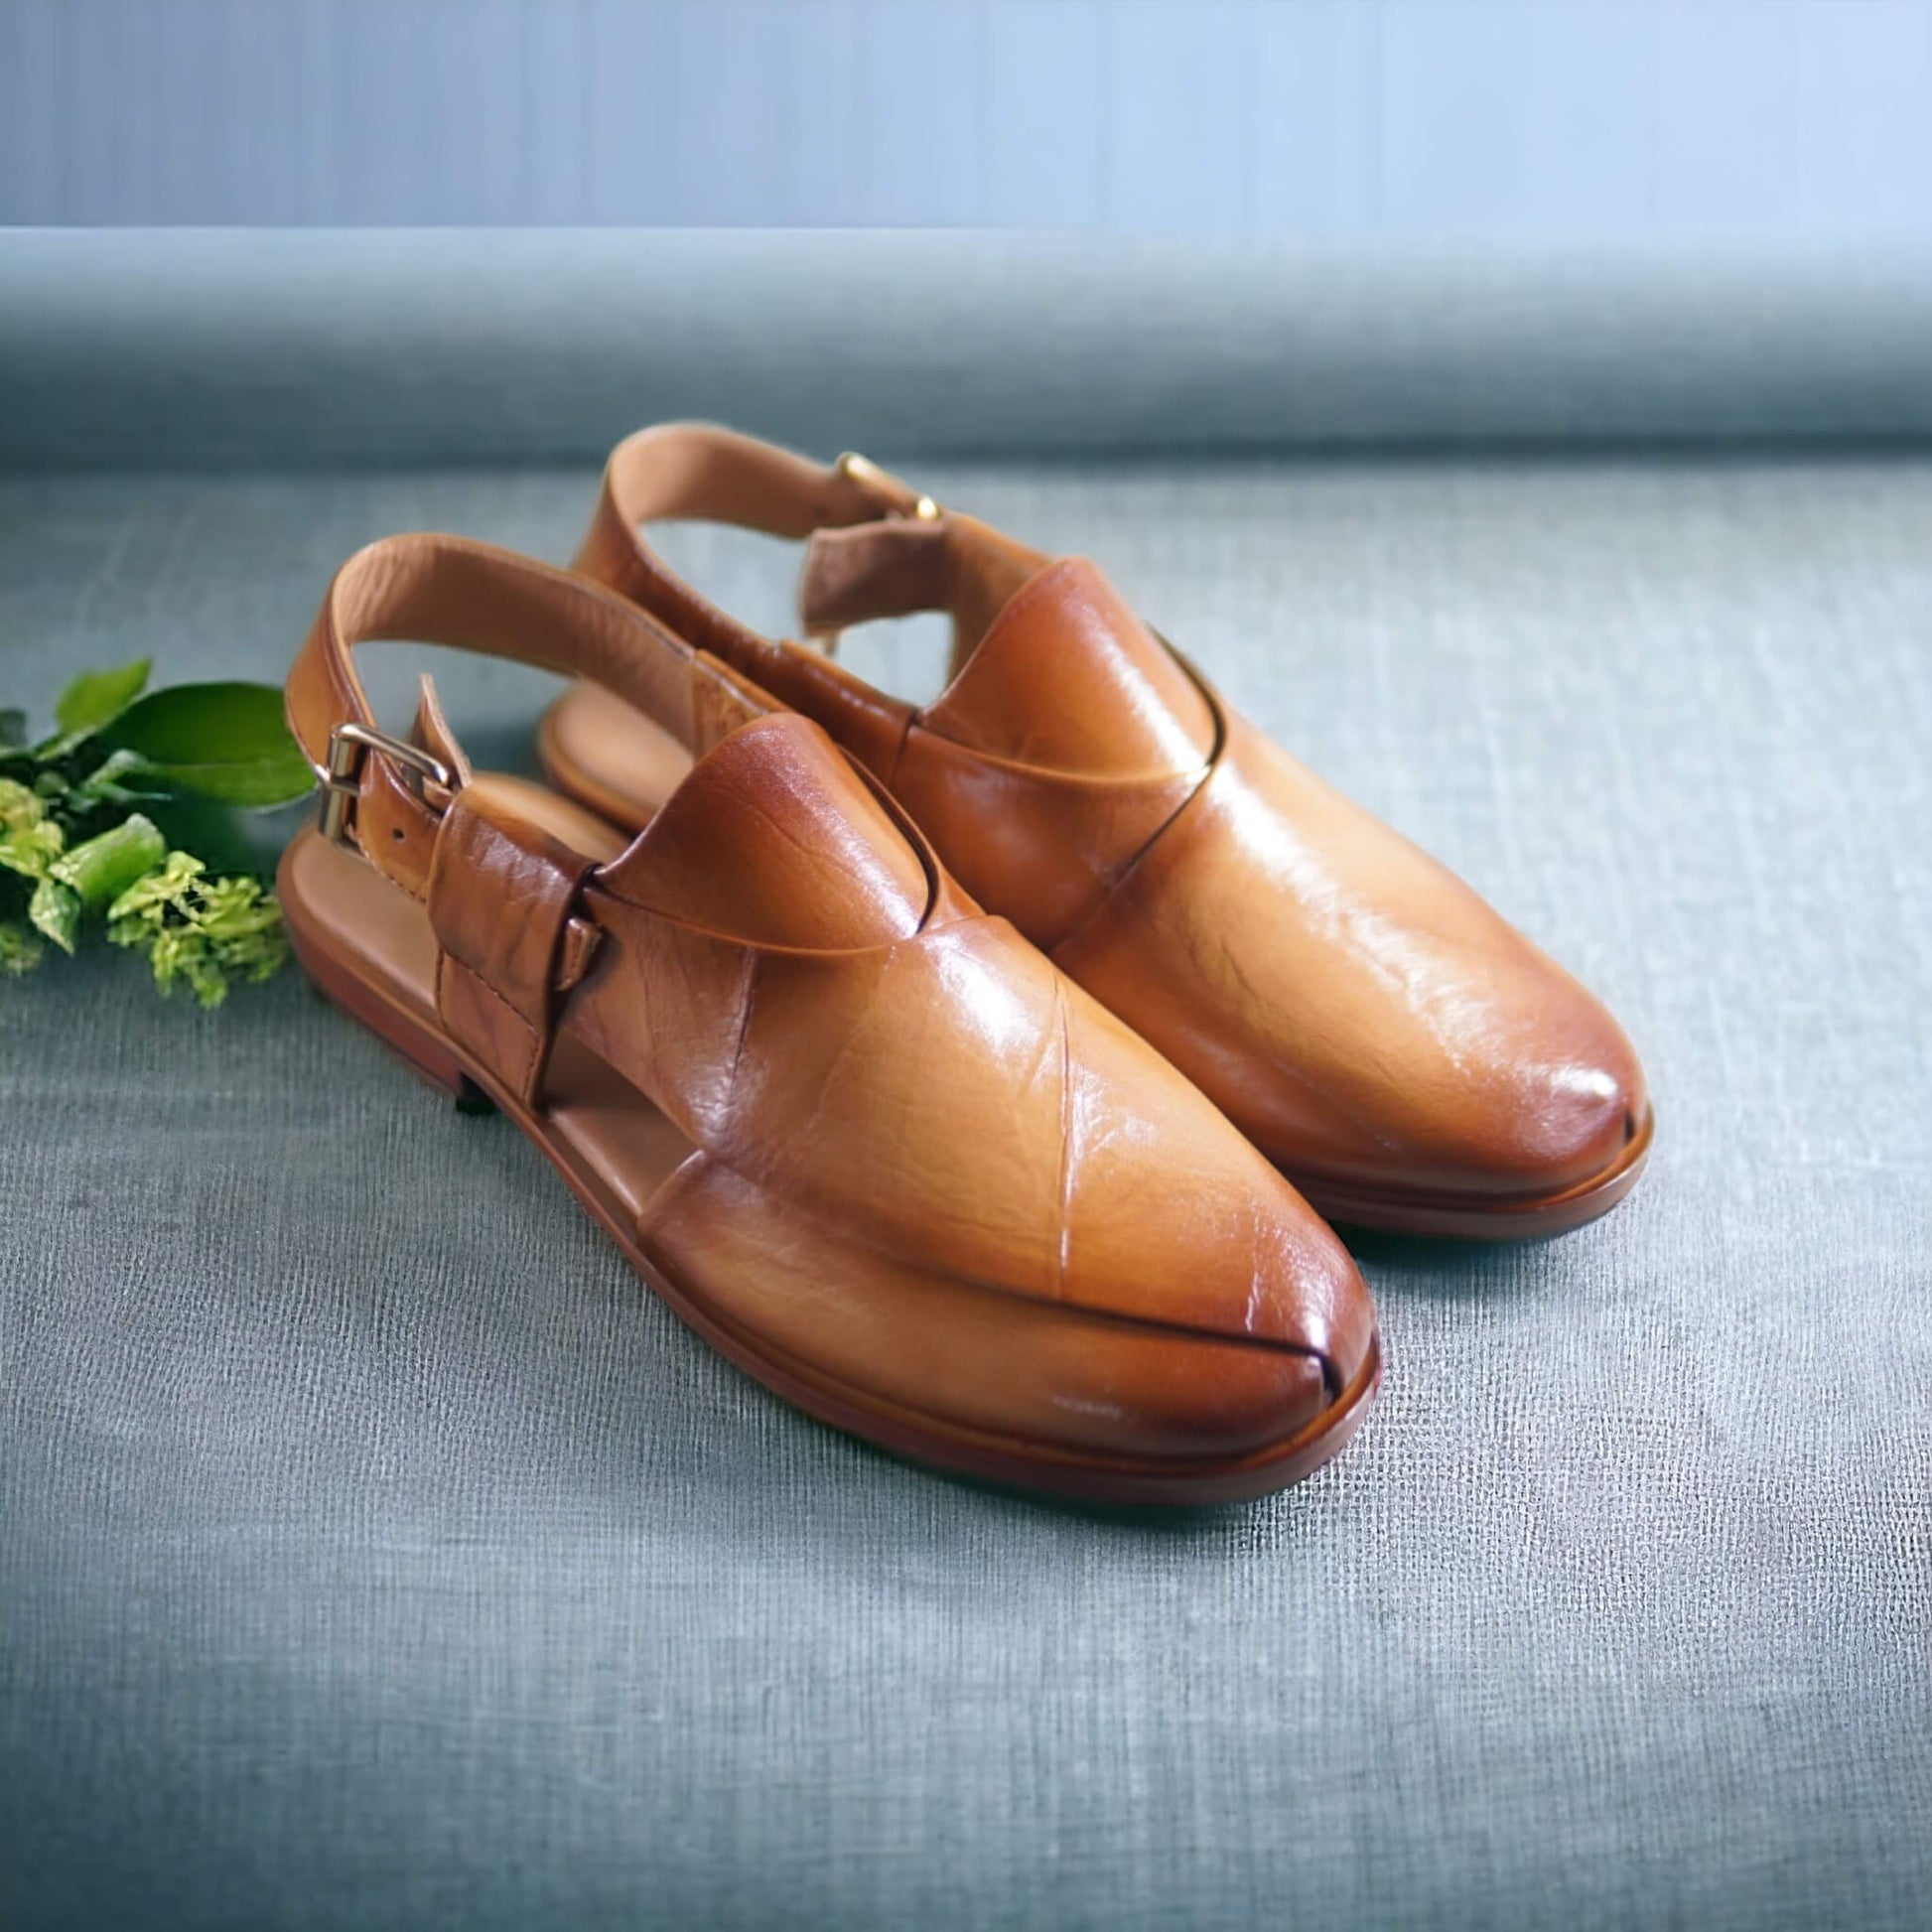 Introducing our handmade leather chappals, meticulously crafted for those who appreciate quality and style. Each pair is skillfully crafted by experienced artisans, ensuring durability and a unique touch. Made from genuine leather, these chappals promise both comfort and a timeless aesthetic. Elevate your footwear collection with the authenticity and craftsmanship of our handmade leather chappals.